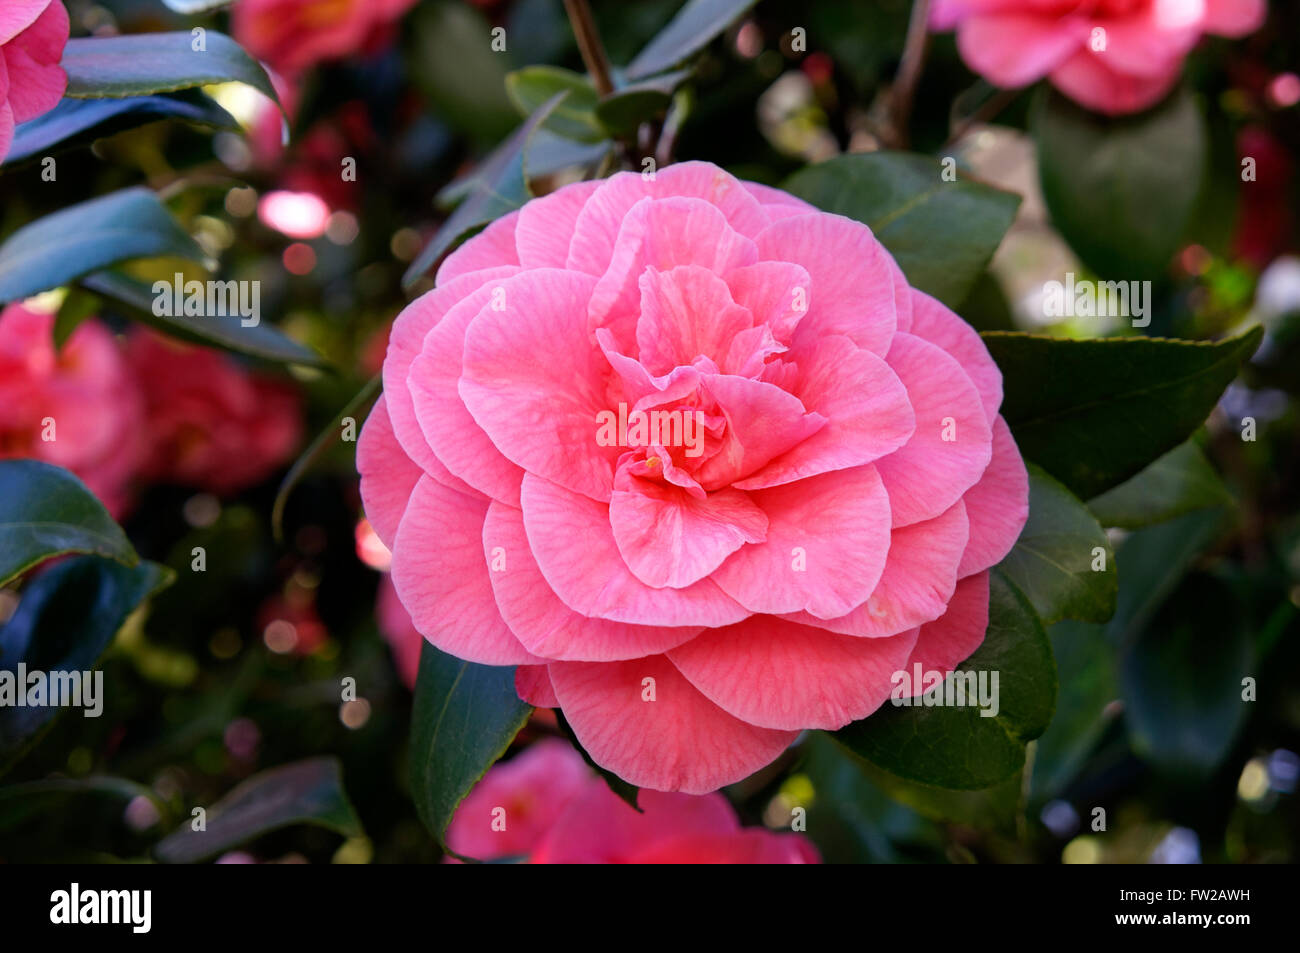 Closeup of a pink Camellia Japonica or Japanese Camellia flower in spring Stock Photo